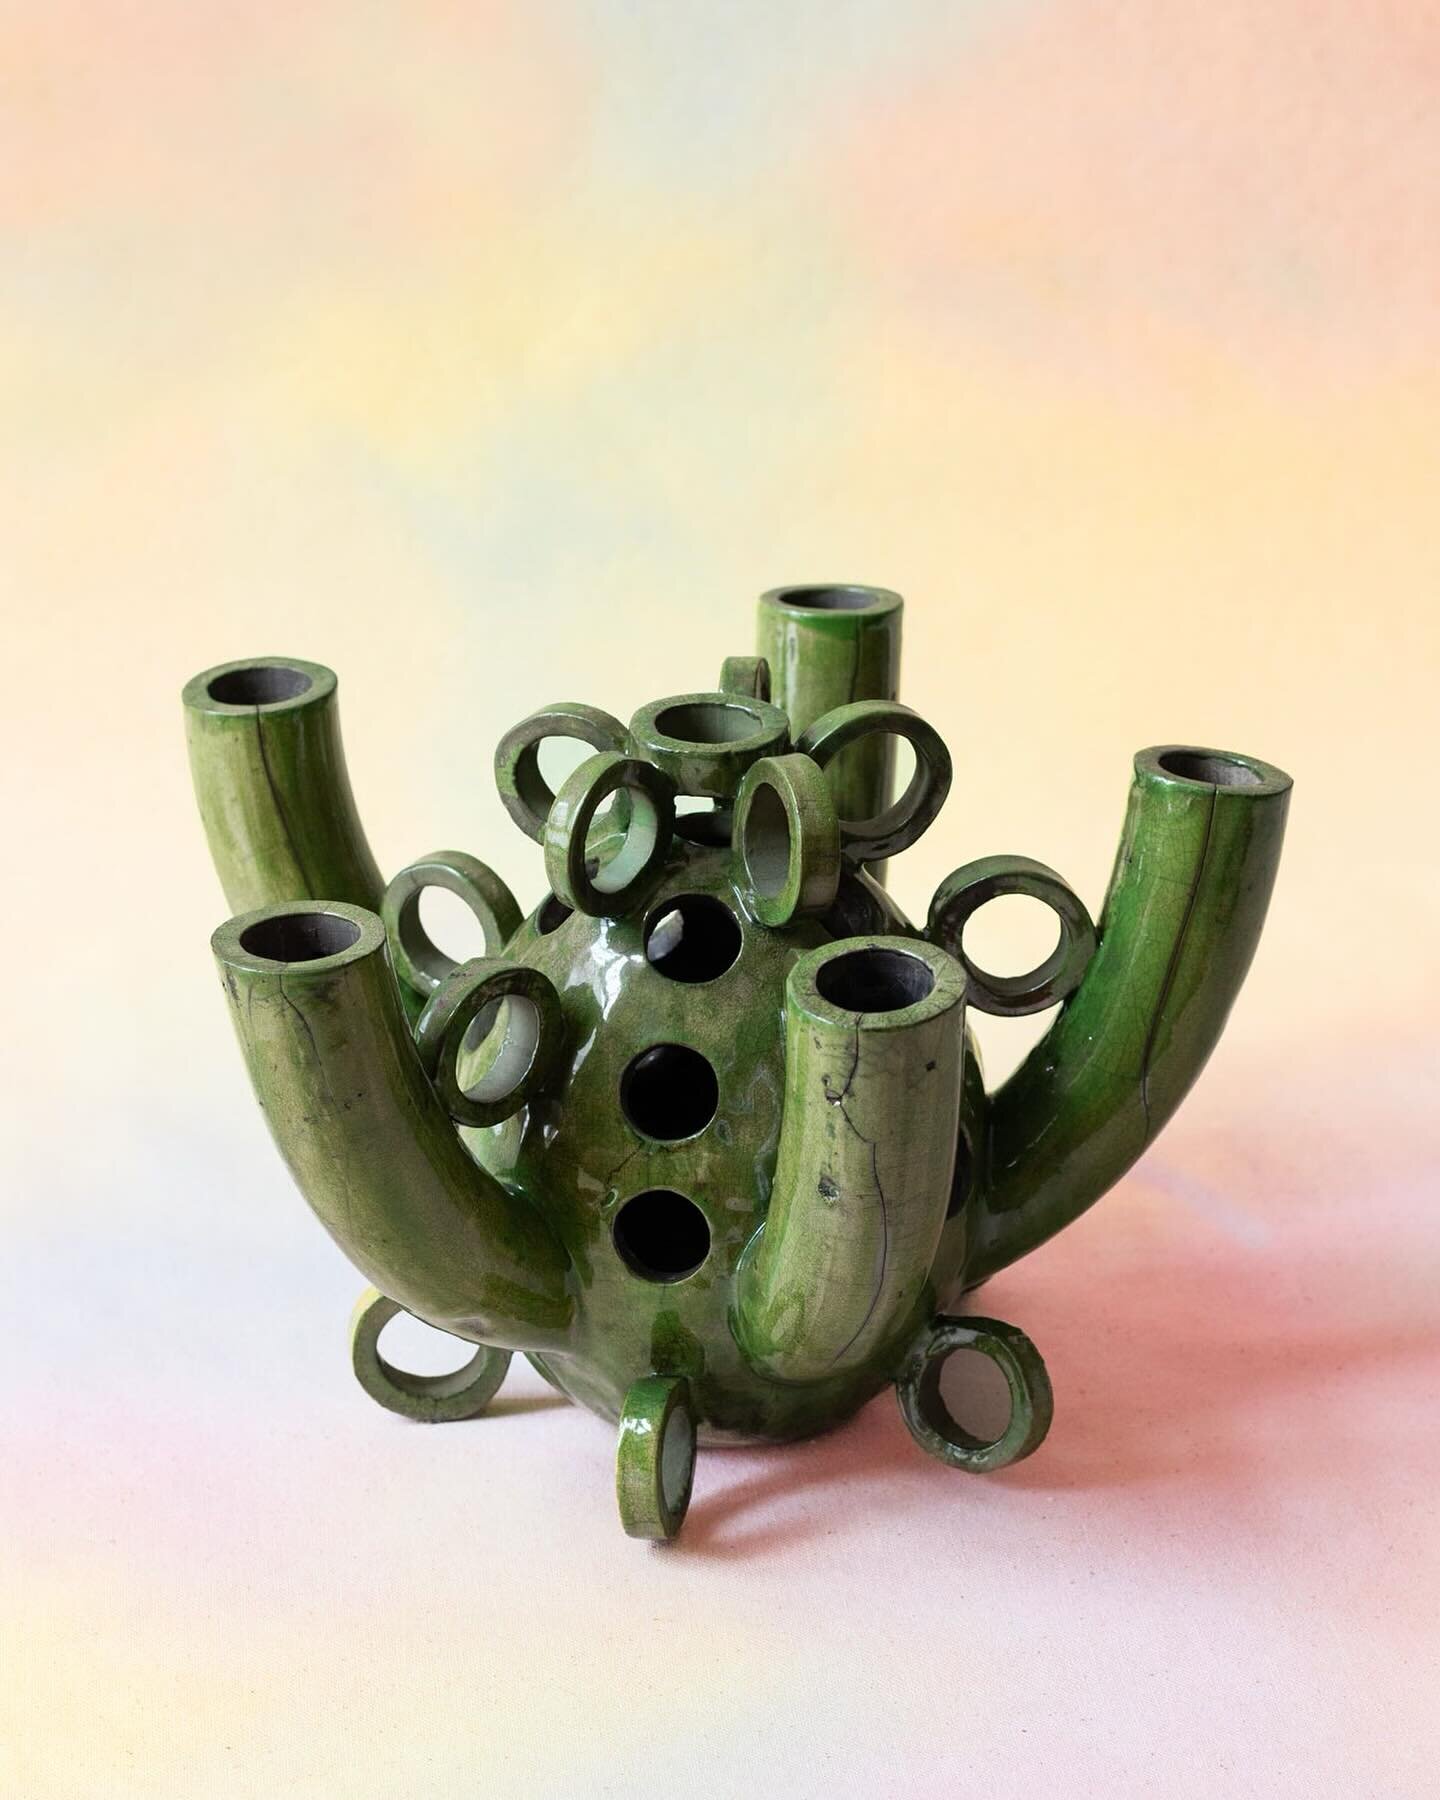 Green Raku. Finally posting photos that I took months ago of work that I made last summer. When life demands all of my attention, art moves in slow motion. 
.
.
.
.
#ceramics #ceramicsculpture #contemporaryceramics #raku #tulipiere #clay